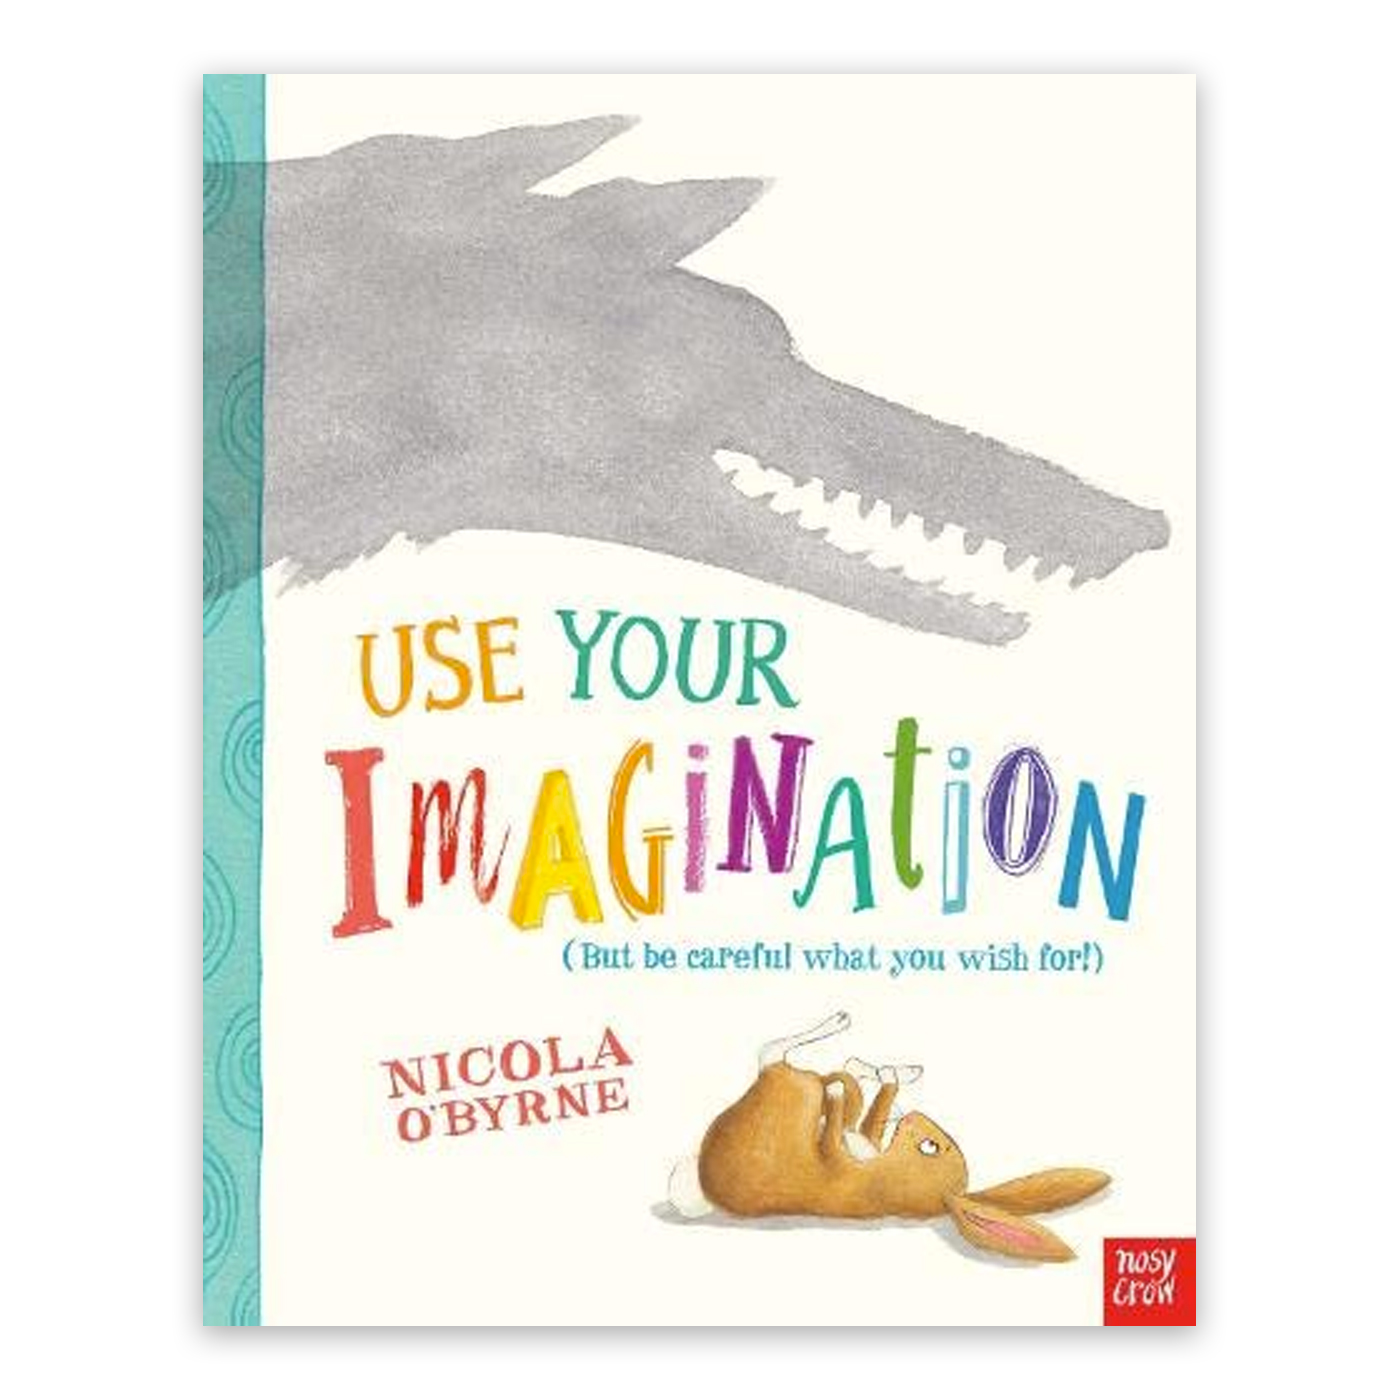  Use Your Imagination